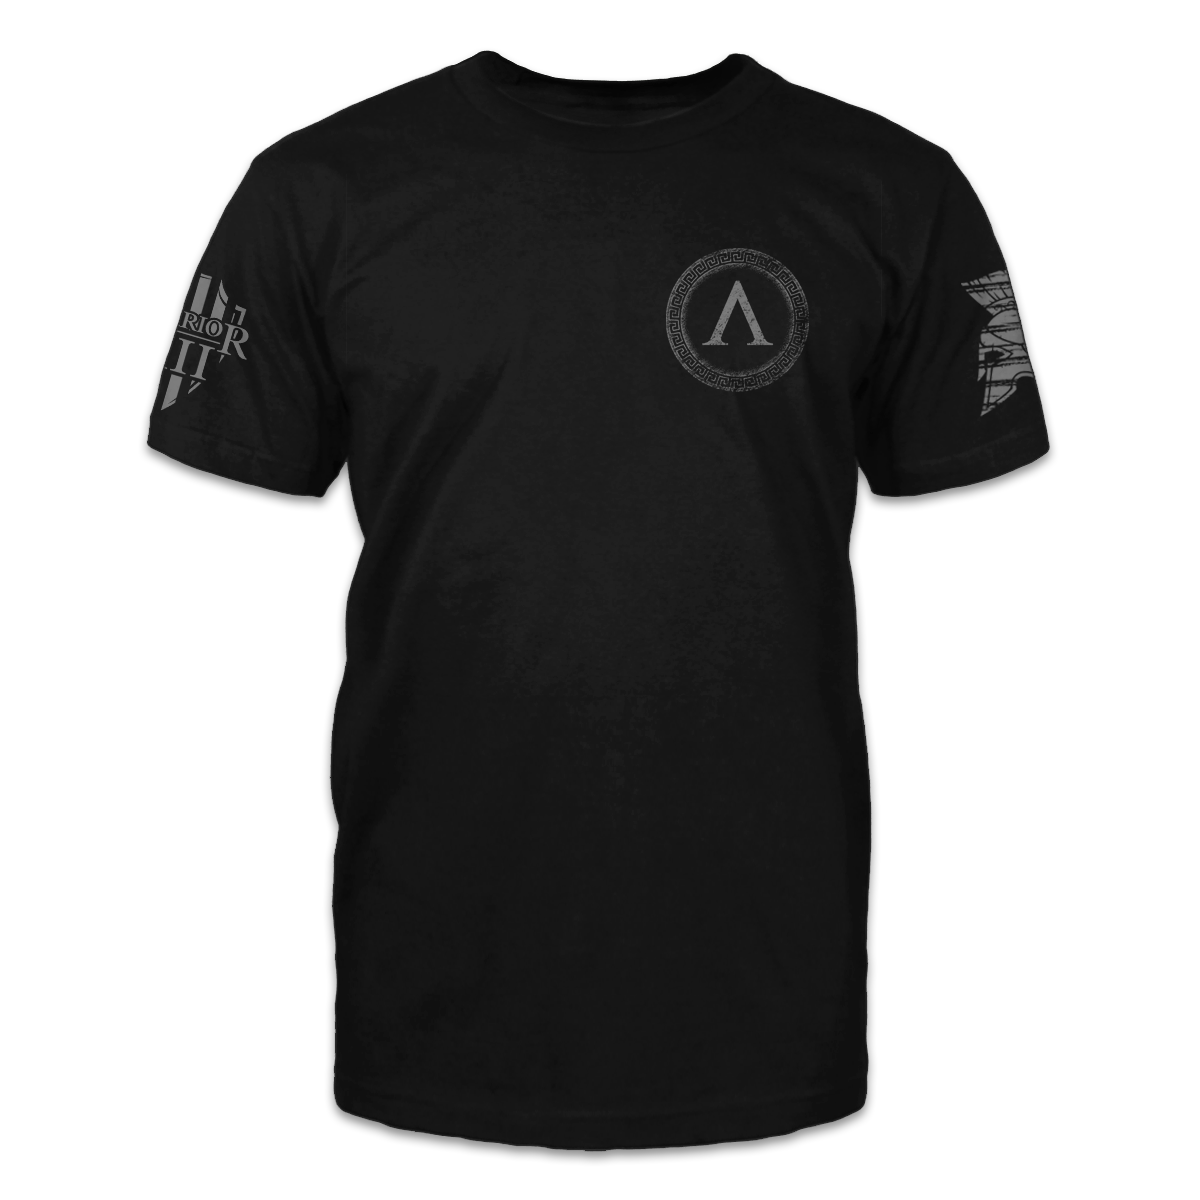 A black t-shirt with a circle and the letter A printed on the front of the shirt.